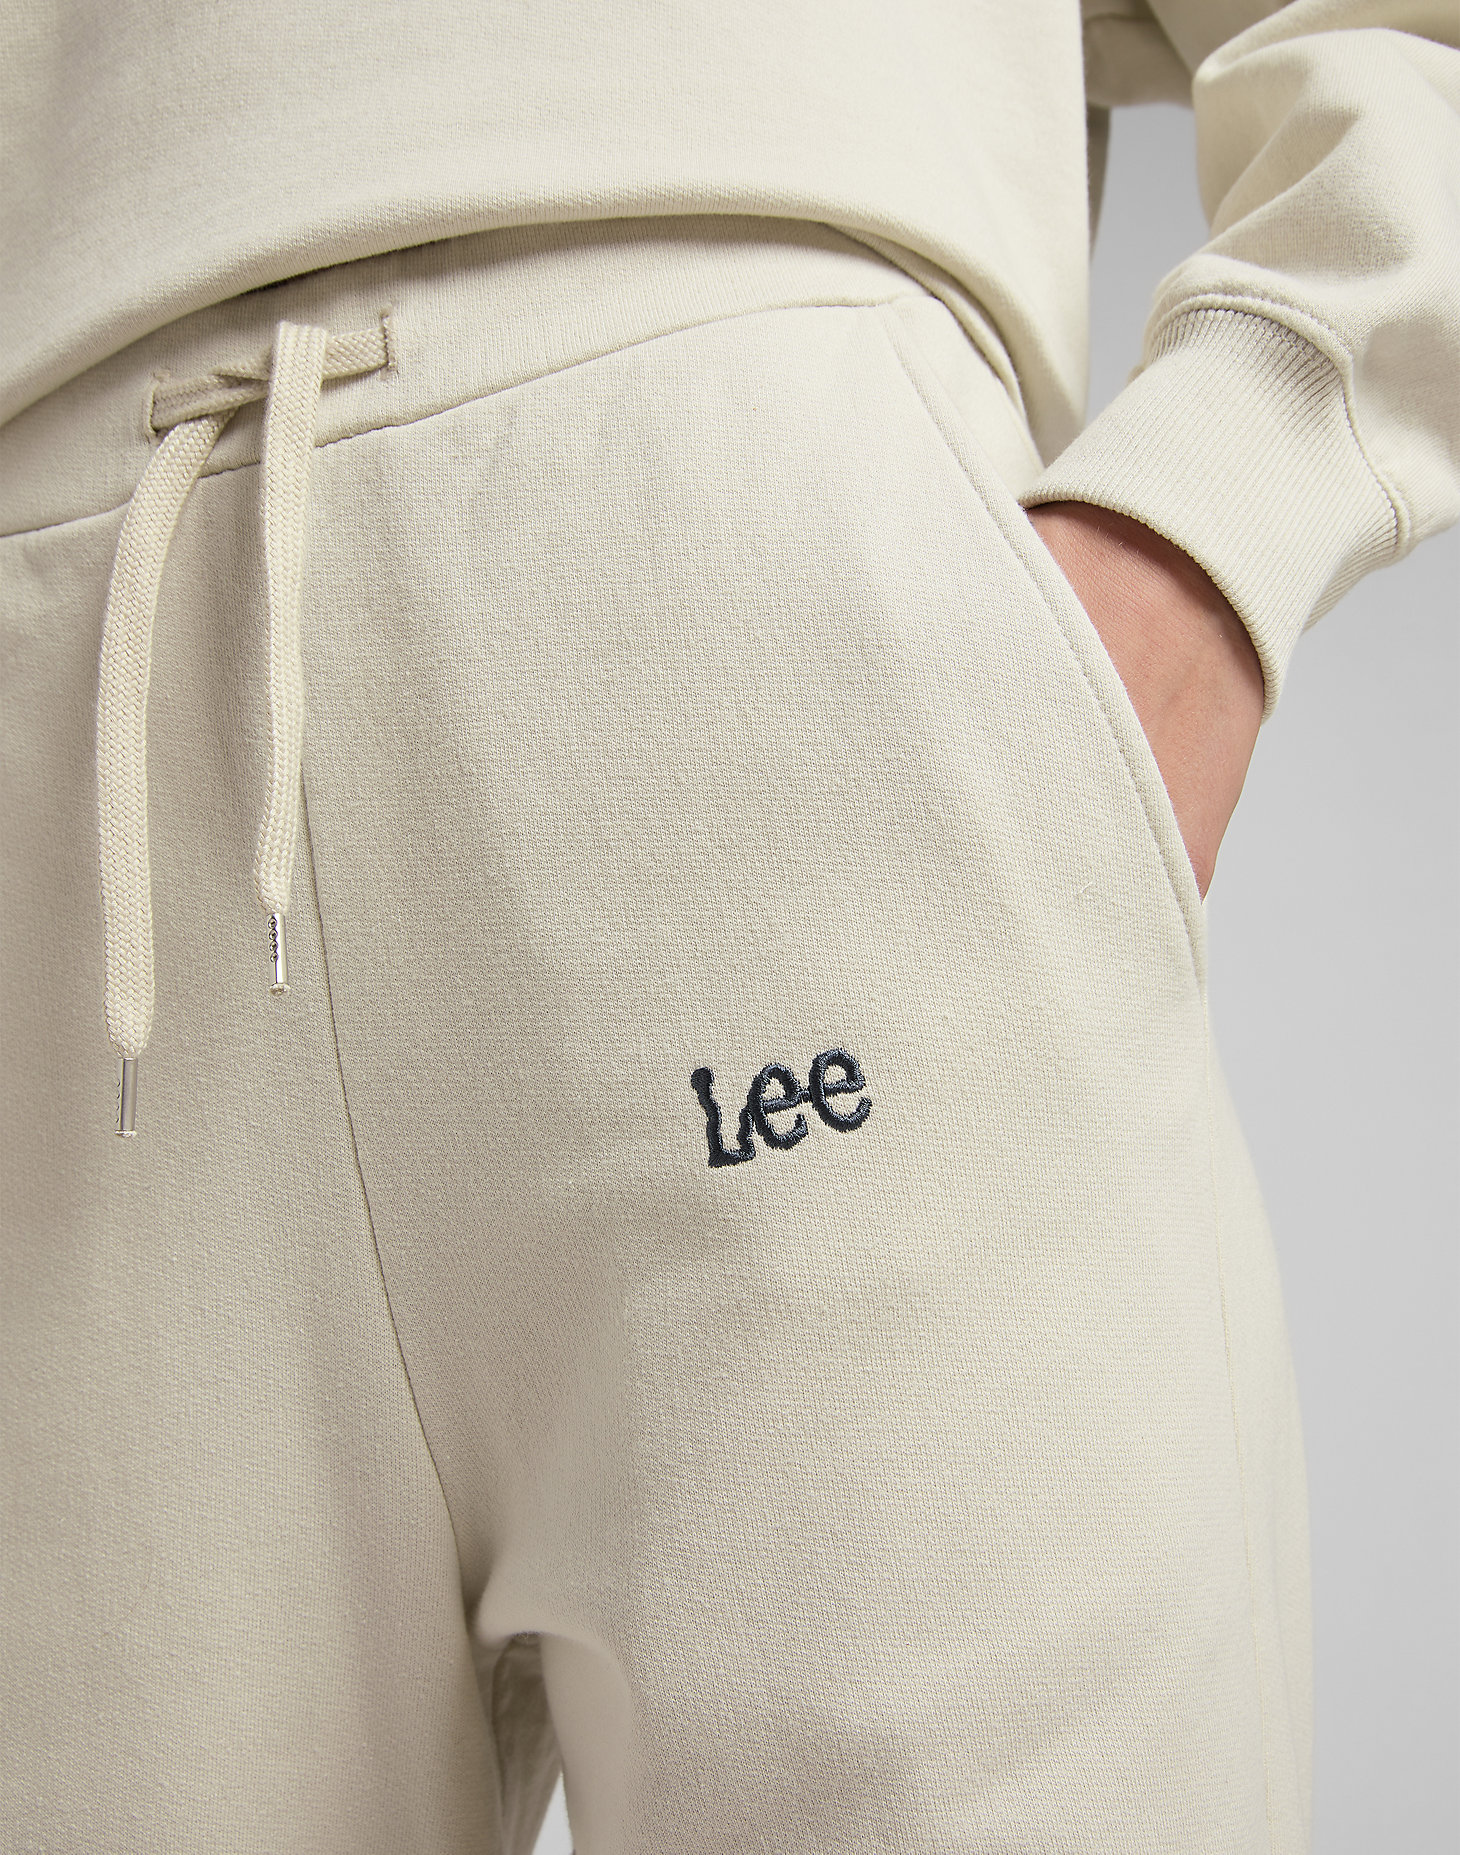 Relaxed Sweatpants in Workwear White alternative view 4